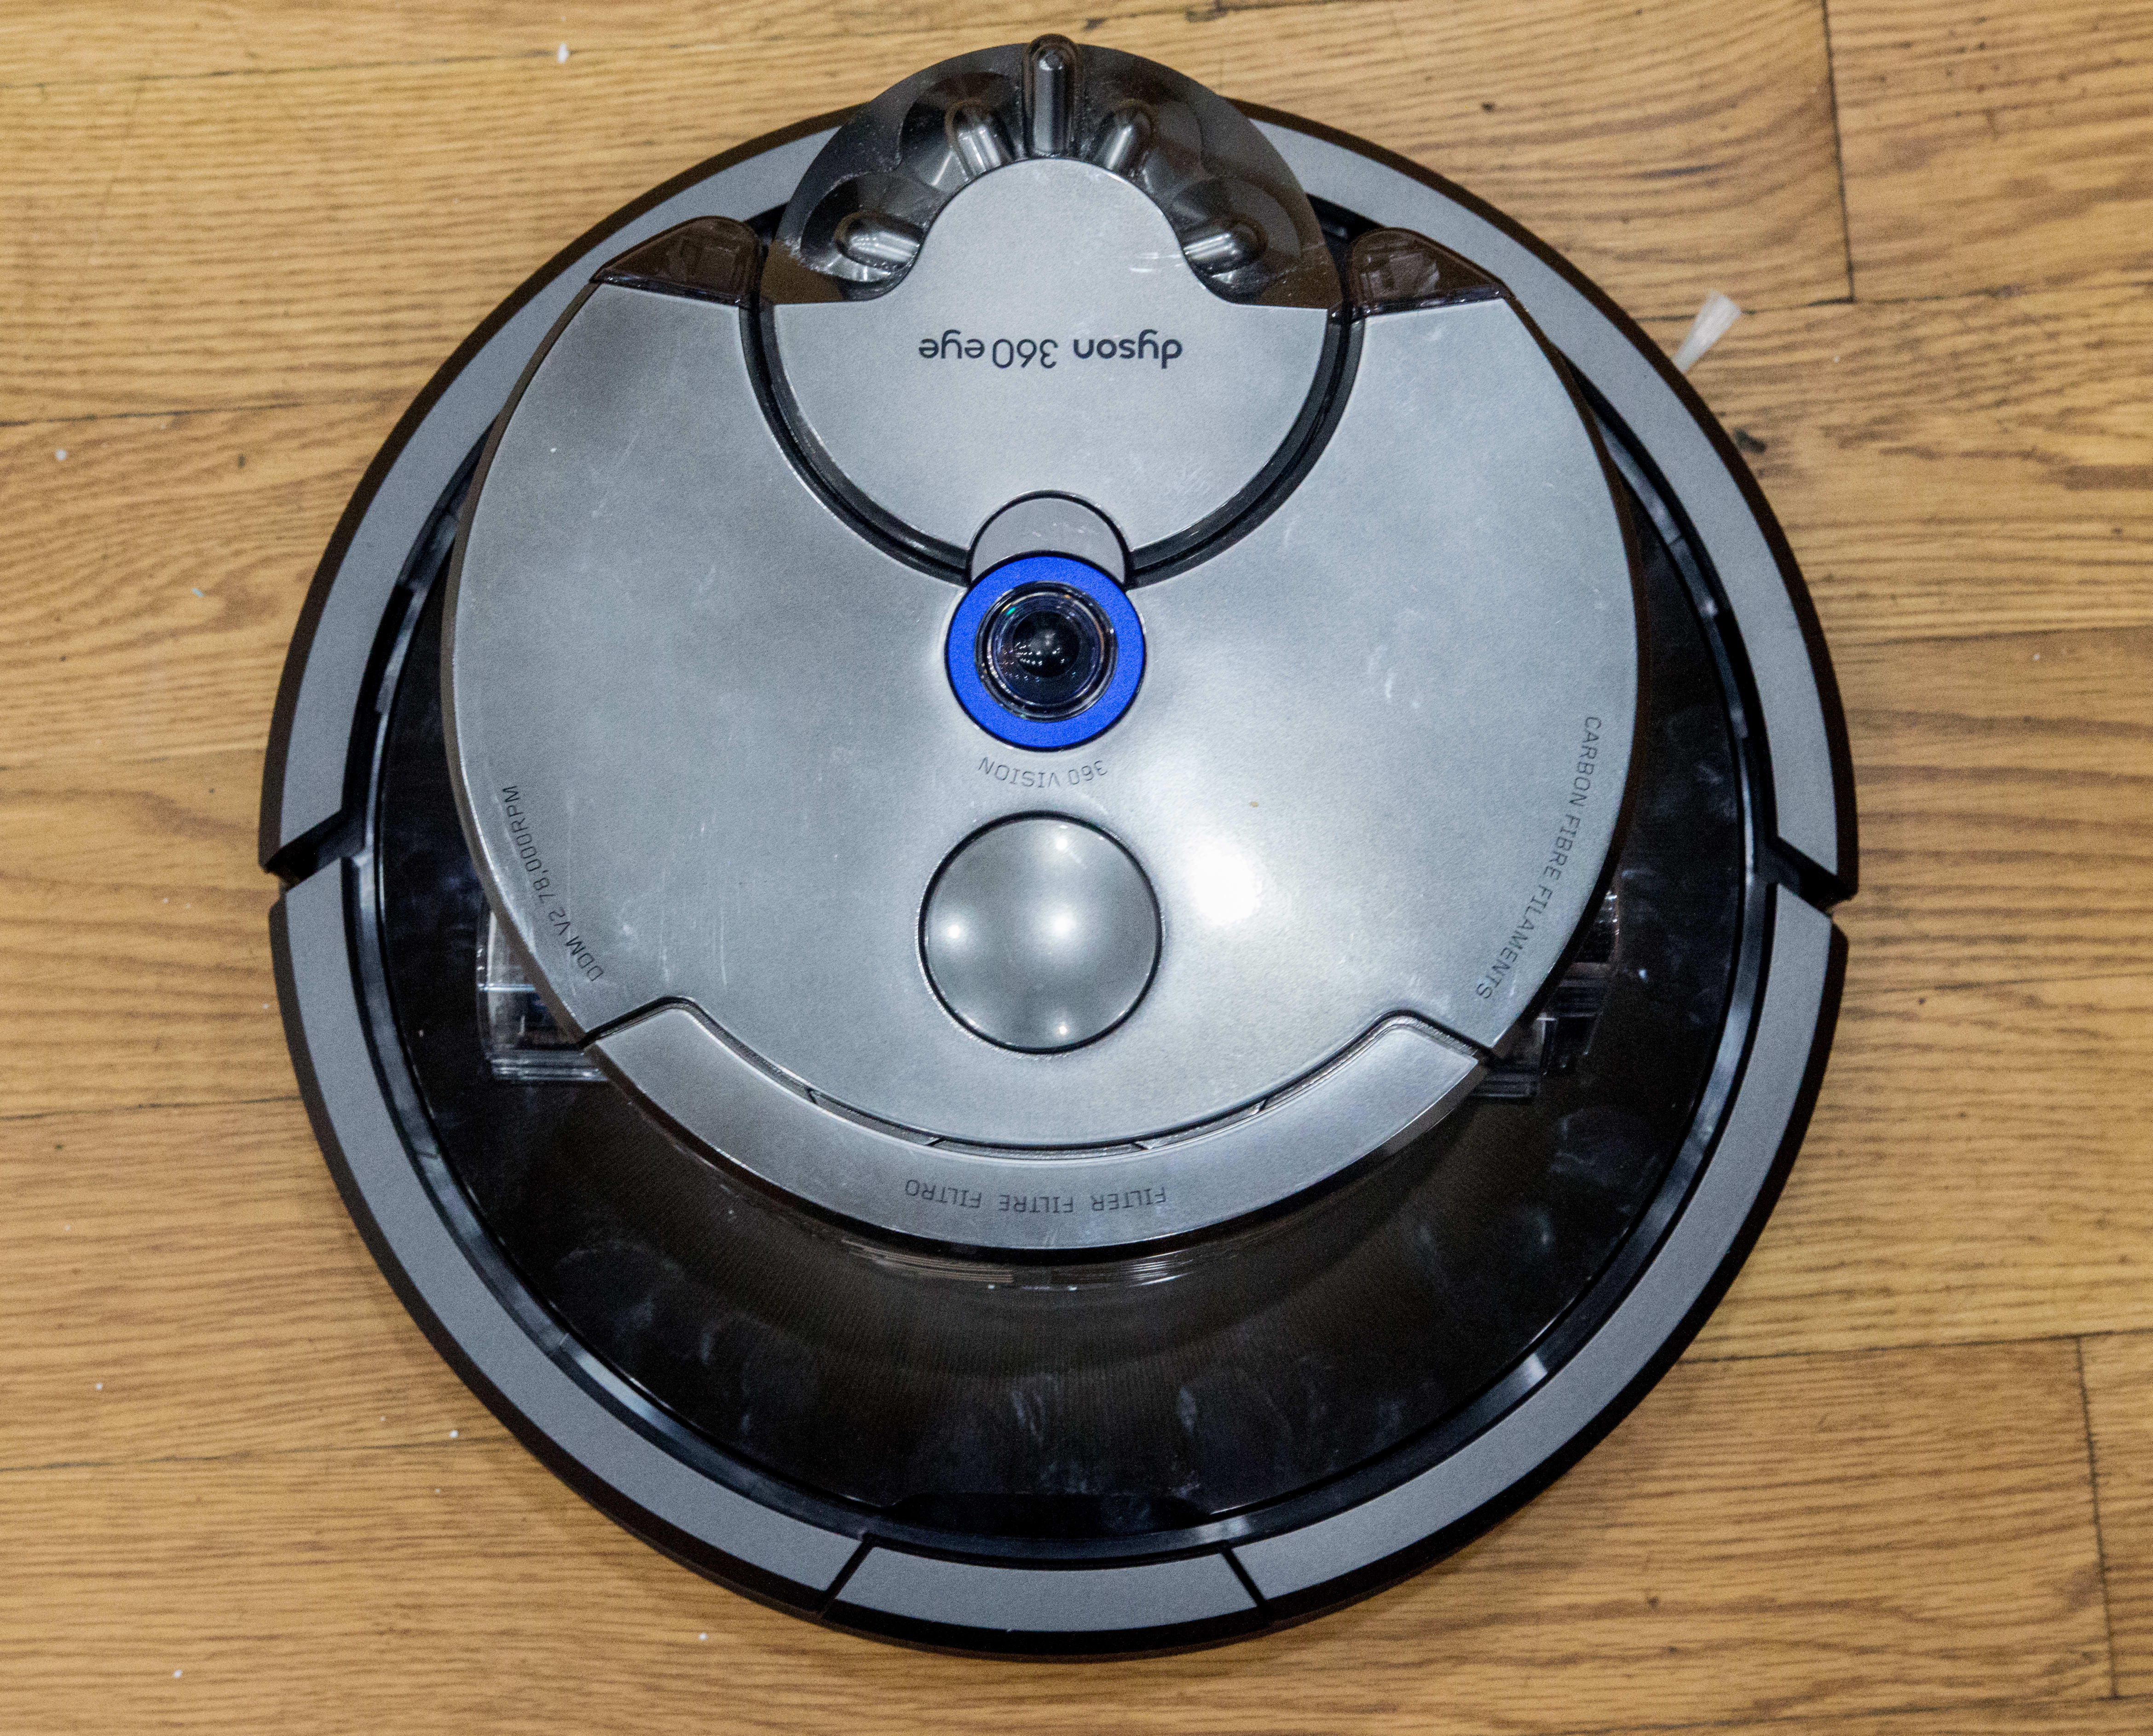 25 Elegant Automatic Vacuum for Hardwood Floors 2024 free download automatic vacuum for hardwood floors of dyson 360 eye robot vacuum cleaner review reviewed com robot vacuums inside the 360 eye is has a smaller footprint but is taller than most robot vacuu